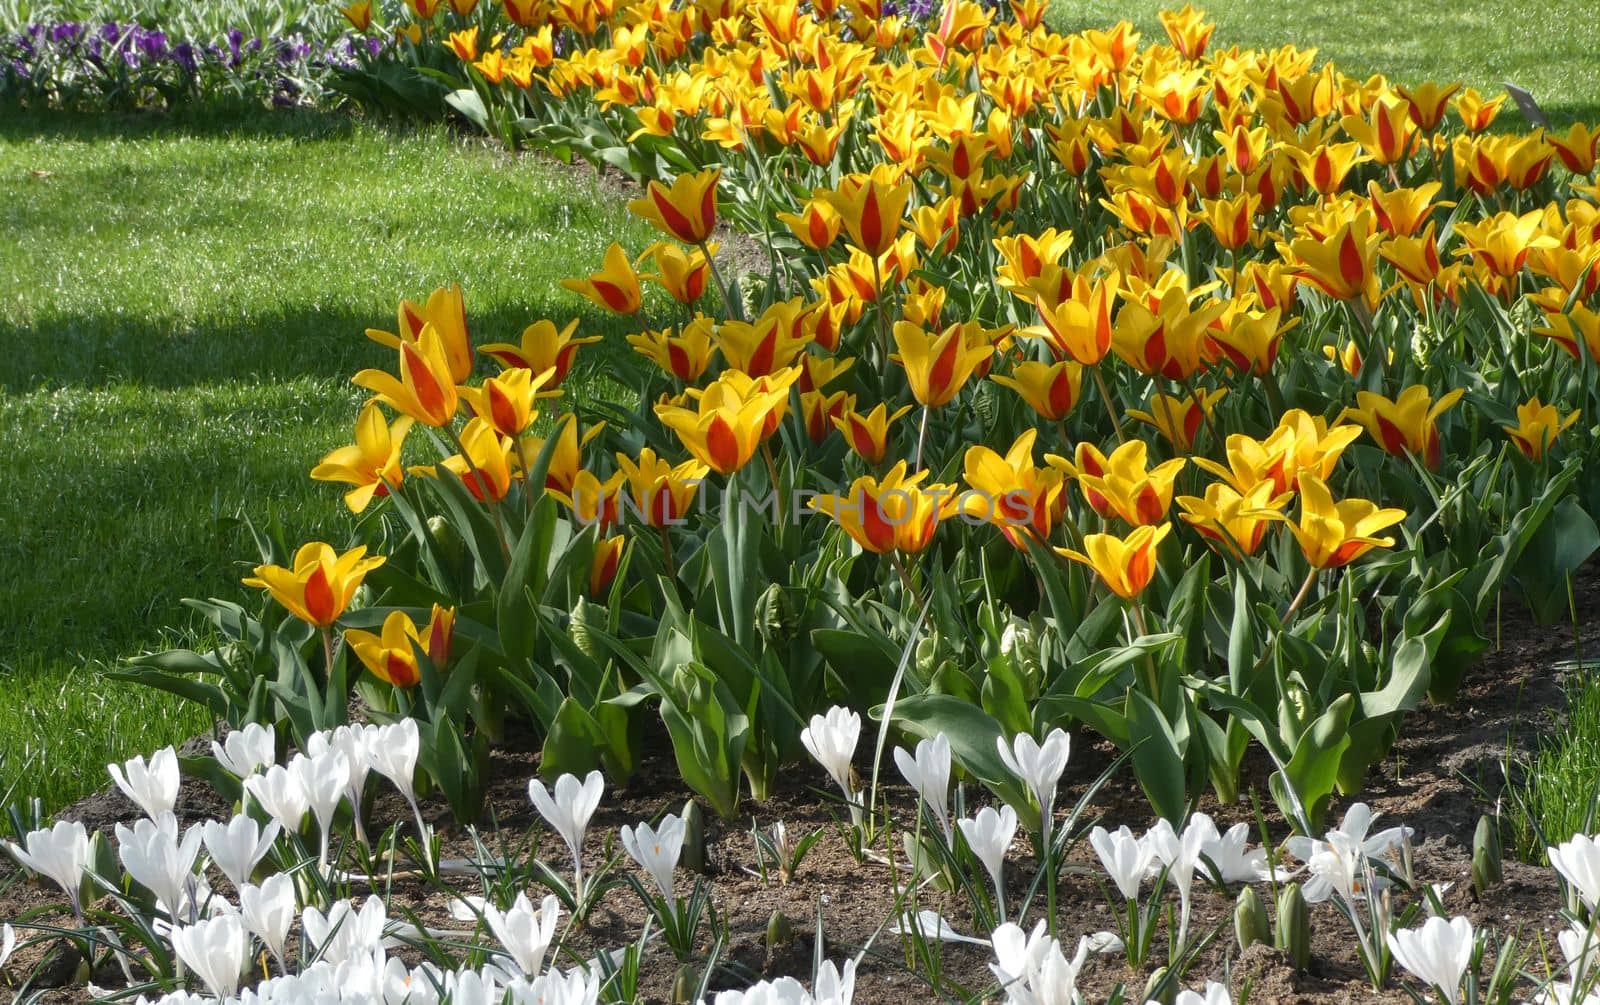 Lovely small yellow-red greigii tulips combined with white crocuses planted between grass. Location: Keukenhof, Netherlands